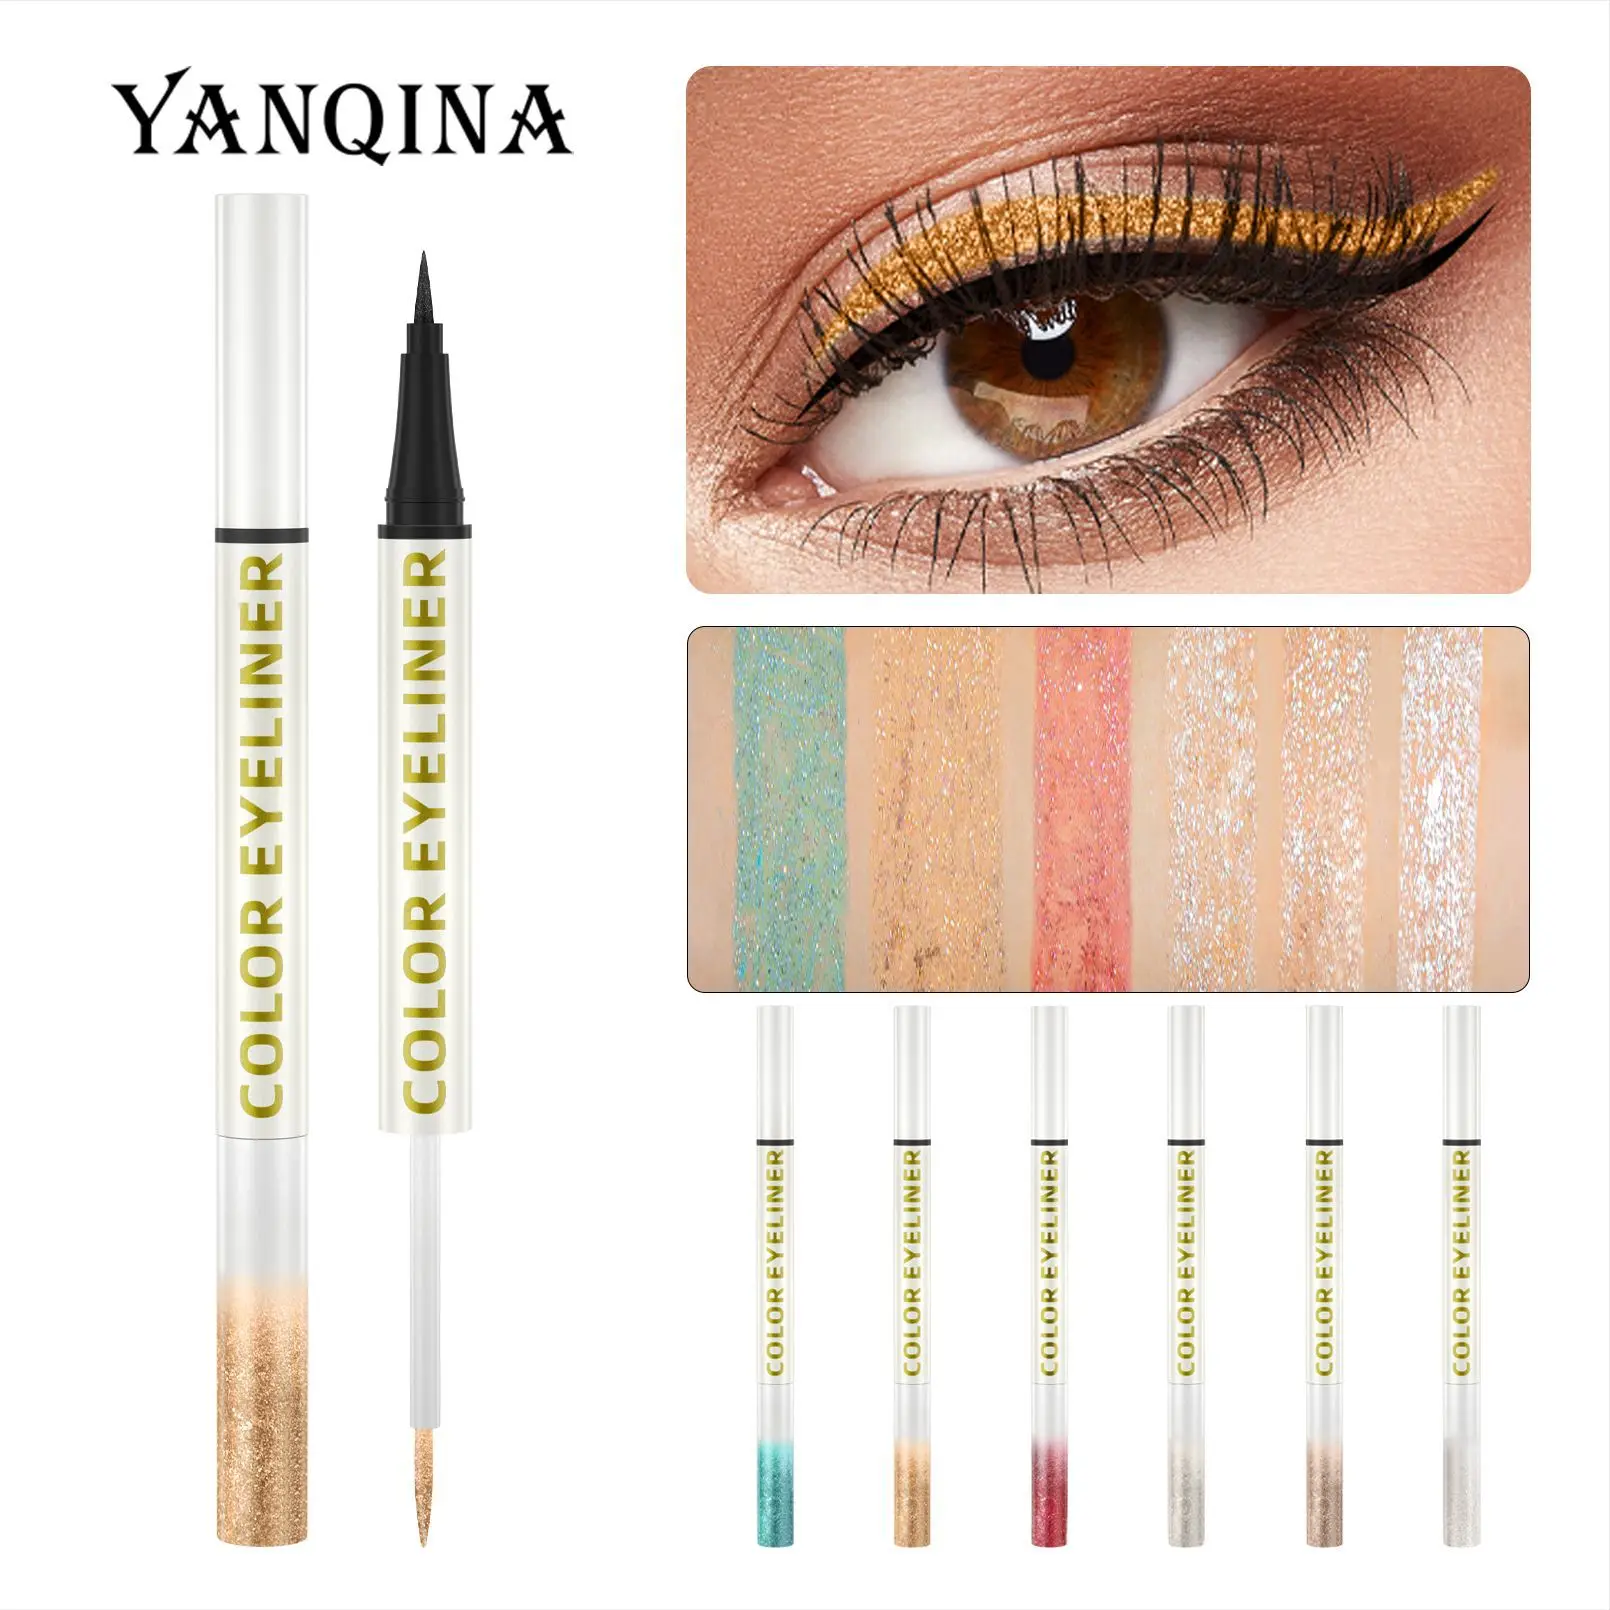 

The New Non-smudge-resistant Double-ended Eyeliner Pearlescent Eyeshadow Pen